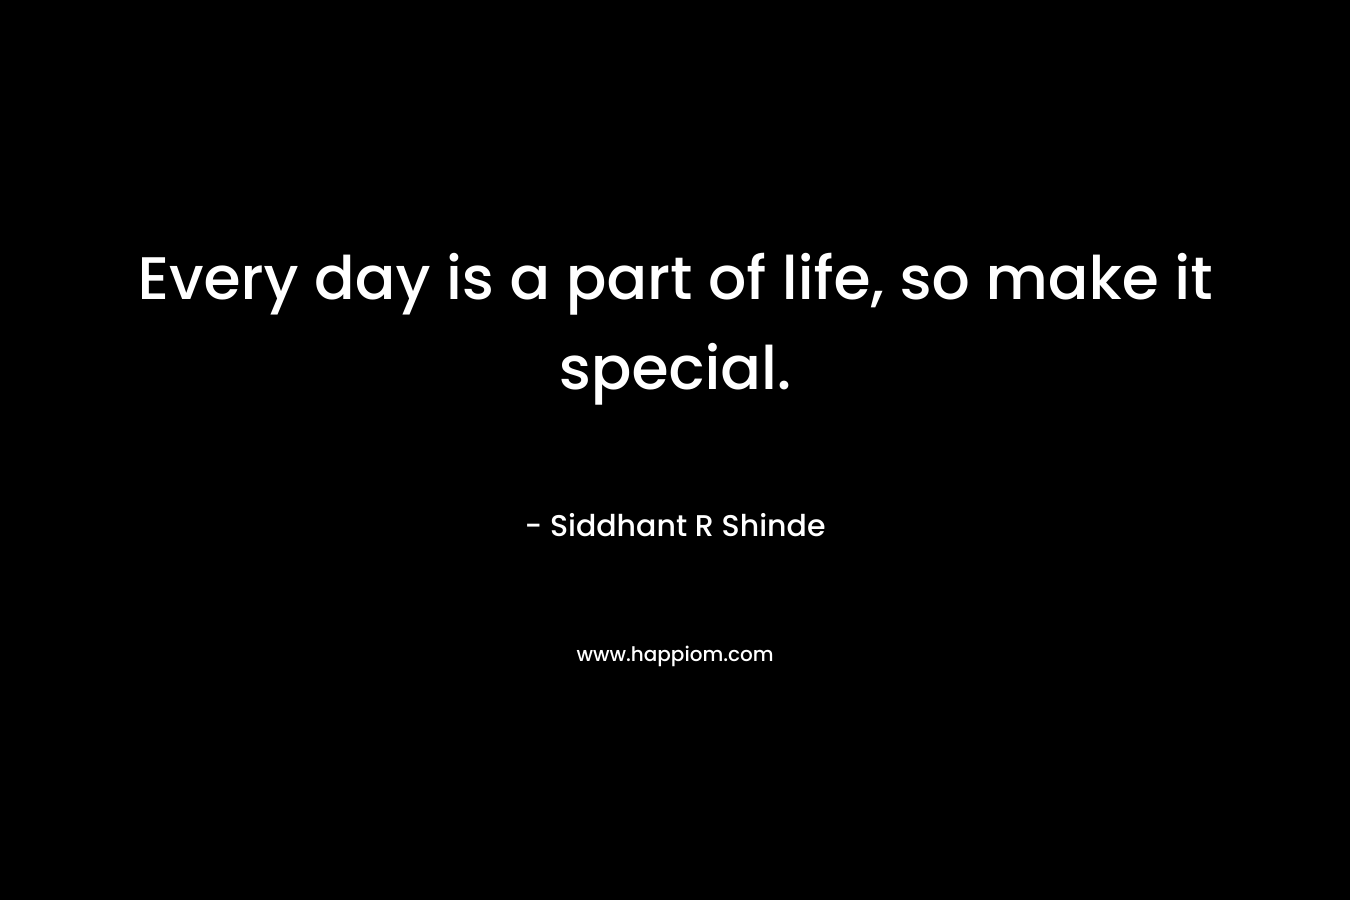 Every day is a part of life, so make it special.